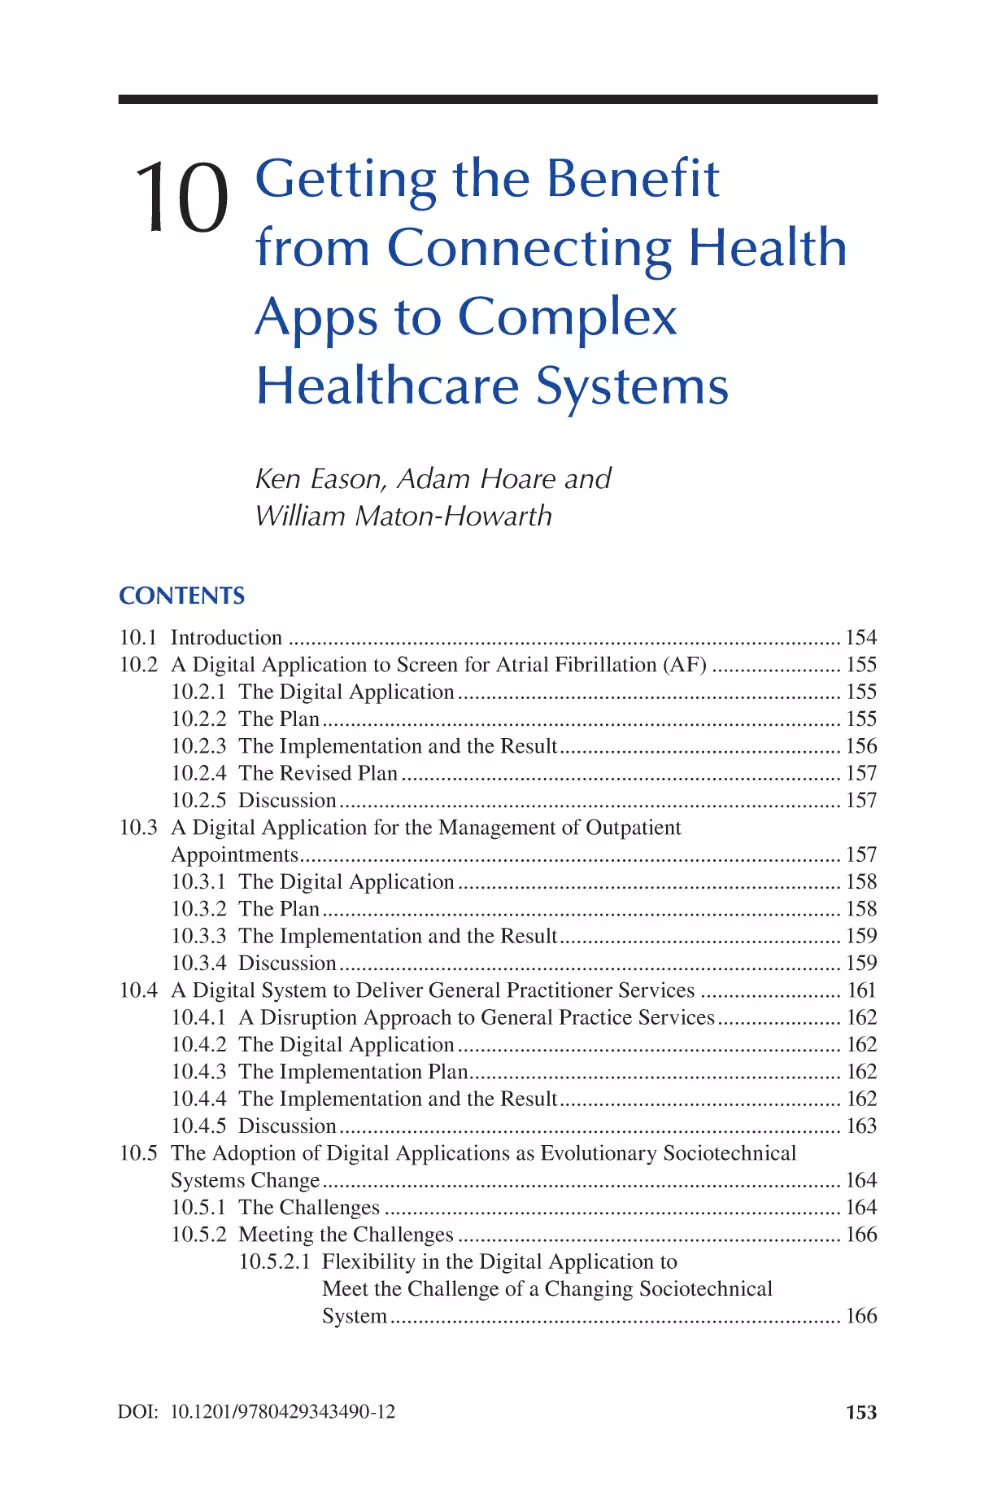 Chapter 10 Getting the Benefit from Connecting Health Apps to Complex Healthcare Systems